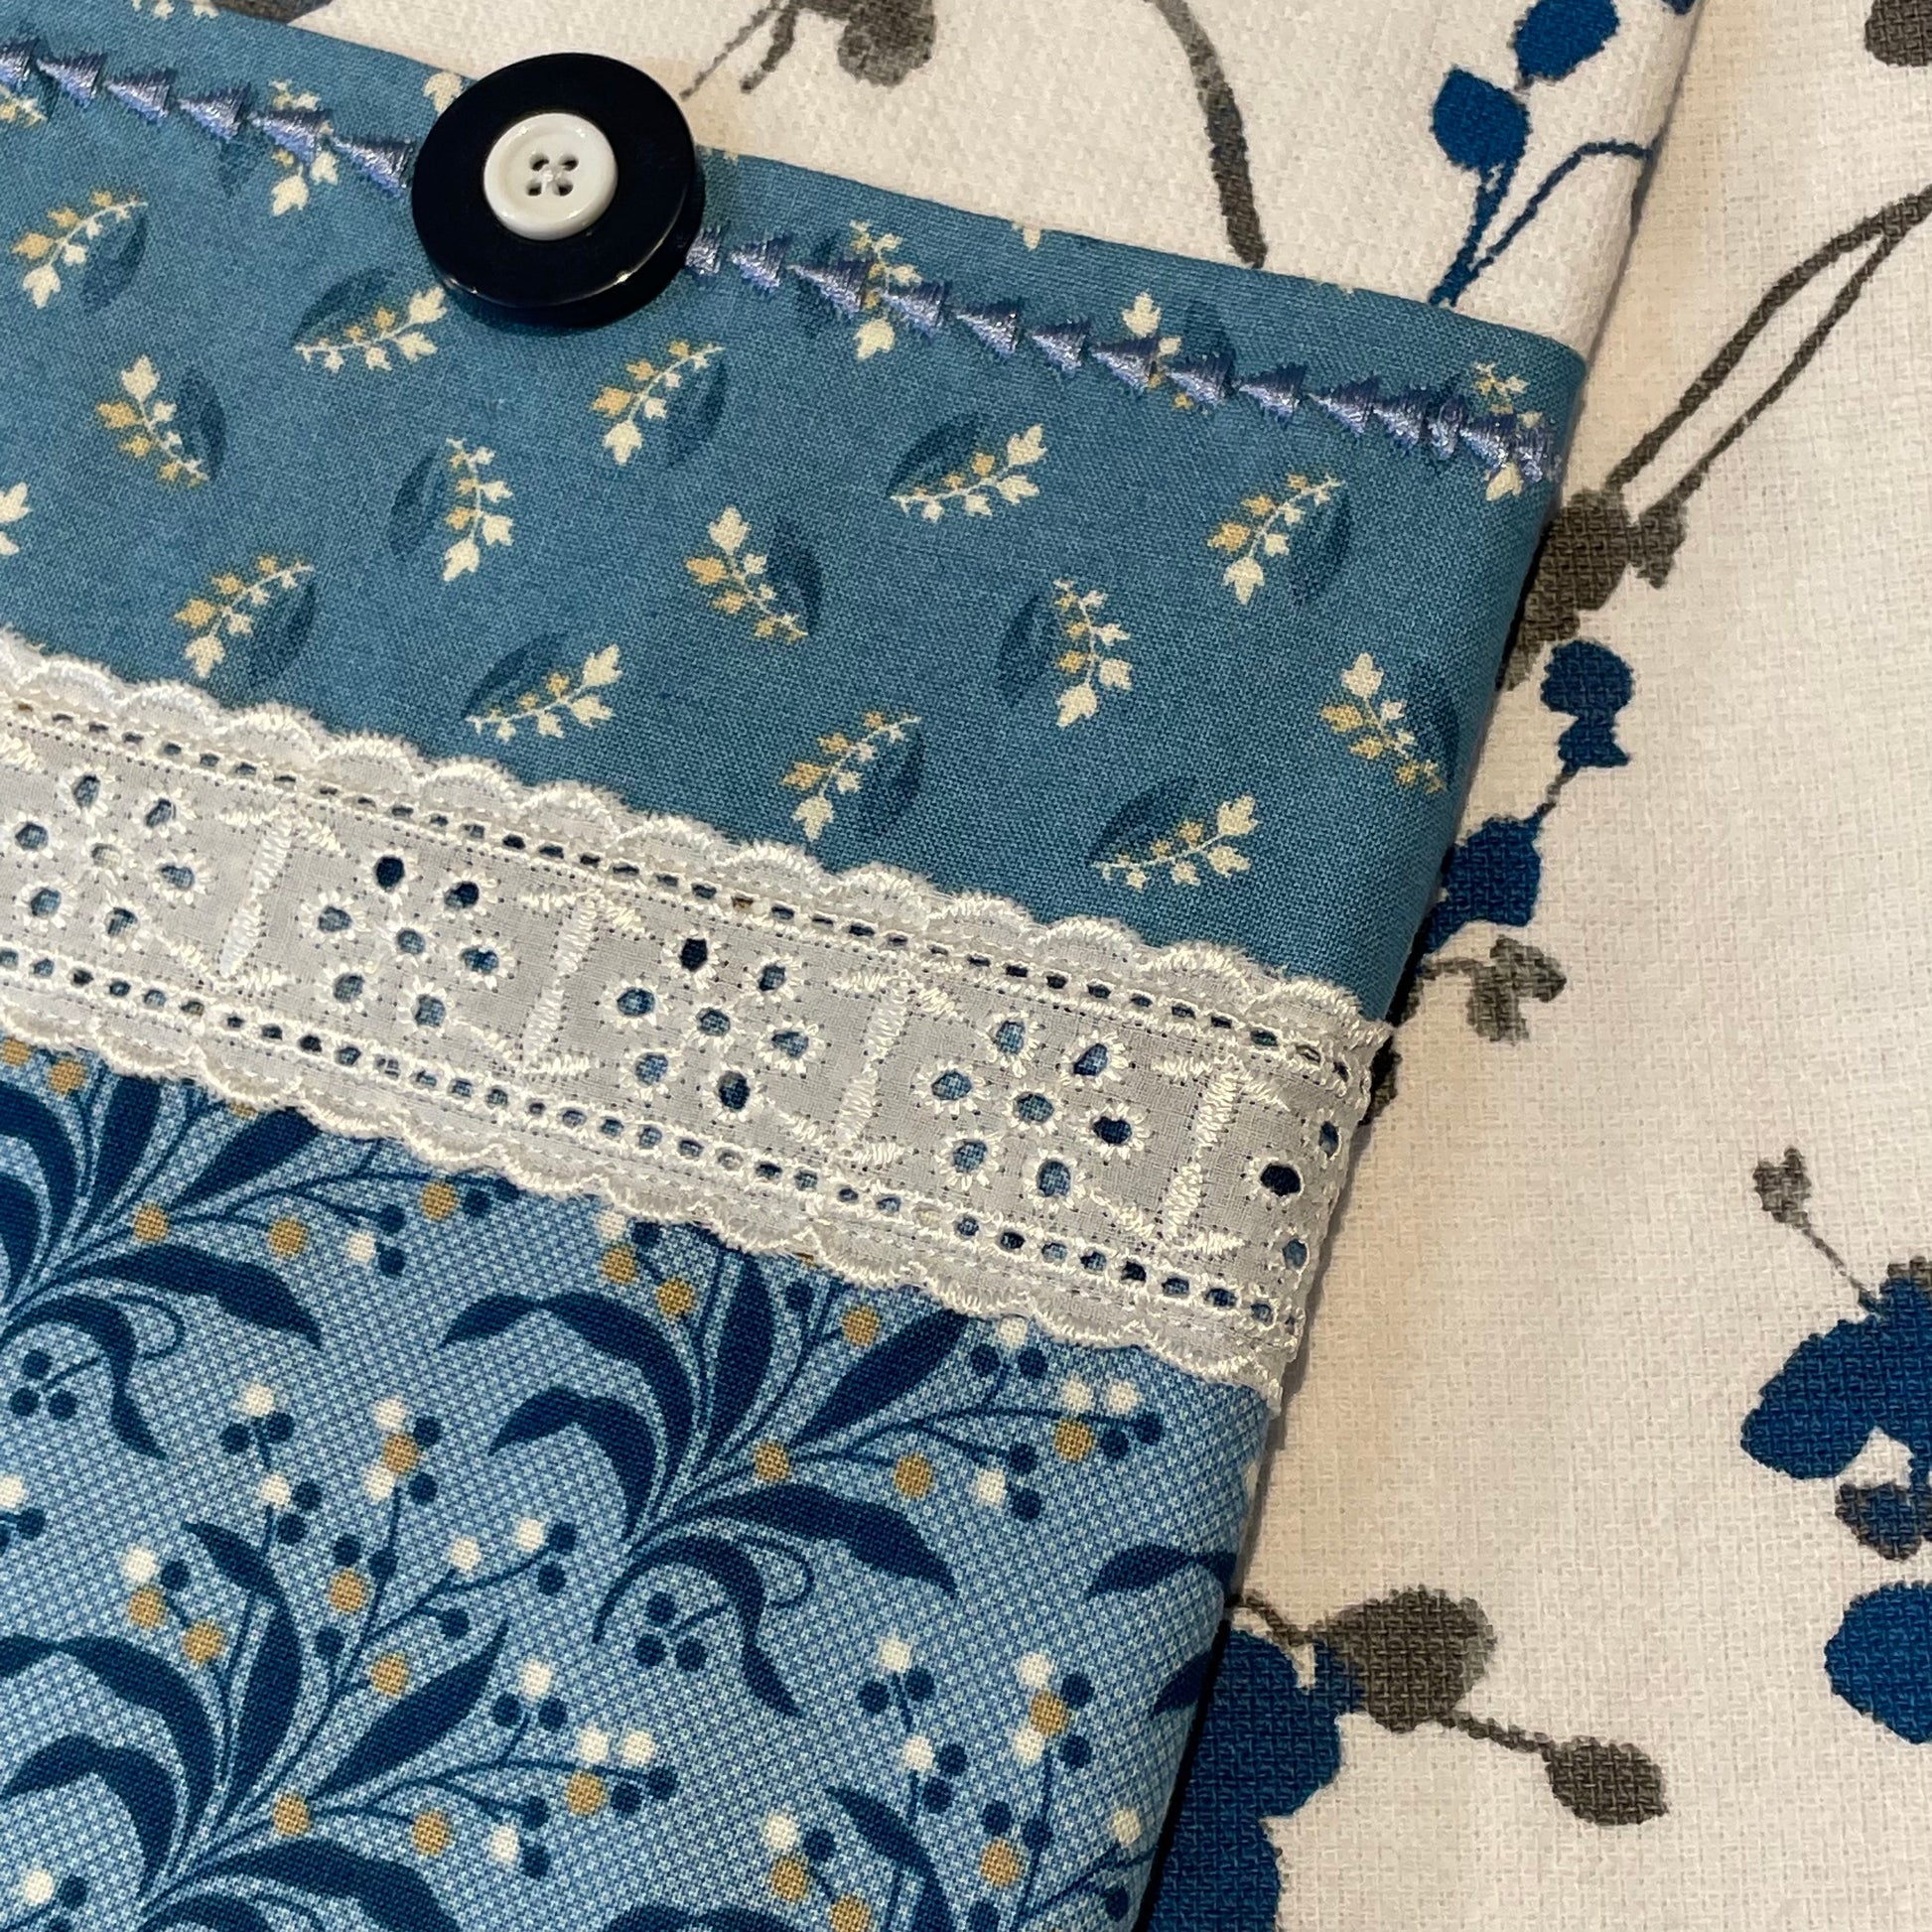 Blue and White Handmade Modern Farmhouse Tea Towel. Part of a mix and match collection of coordinating farmhouse home decor. Check it out at Home Stitchery Decor and be sure to check out the Home Stitchery Decor YouTube Channel